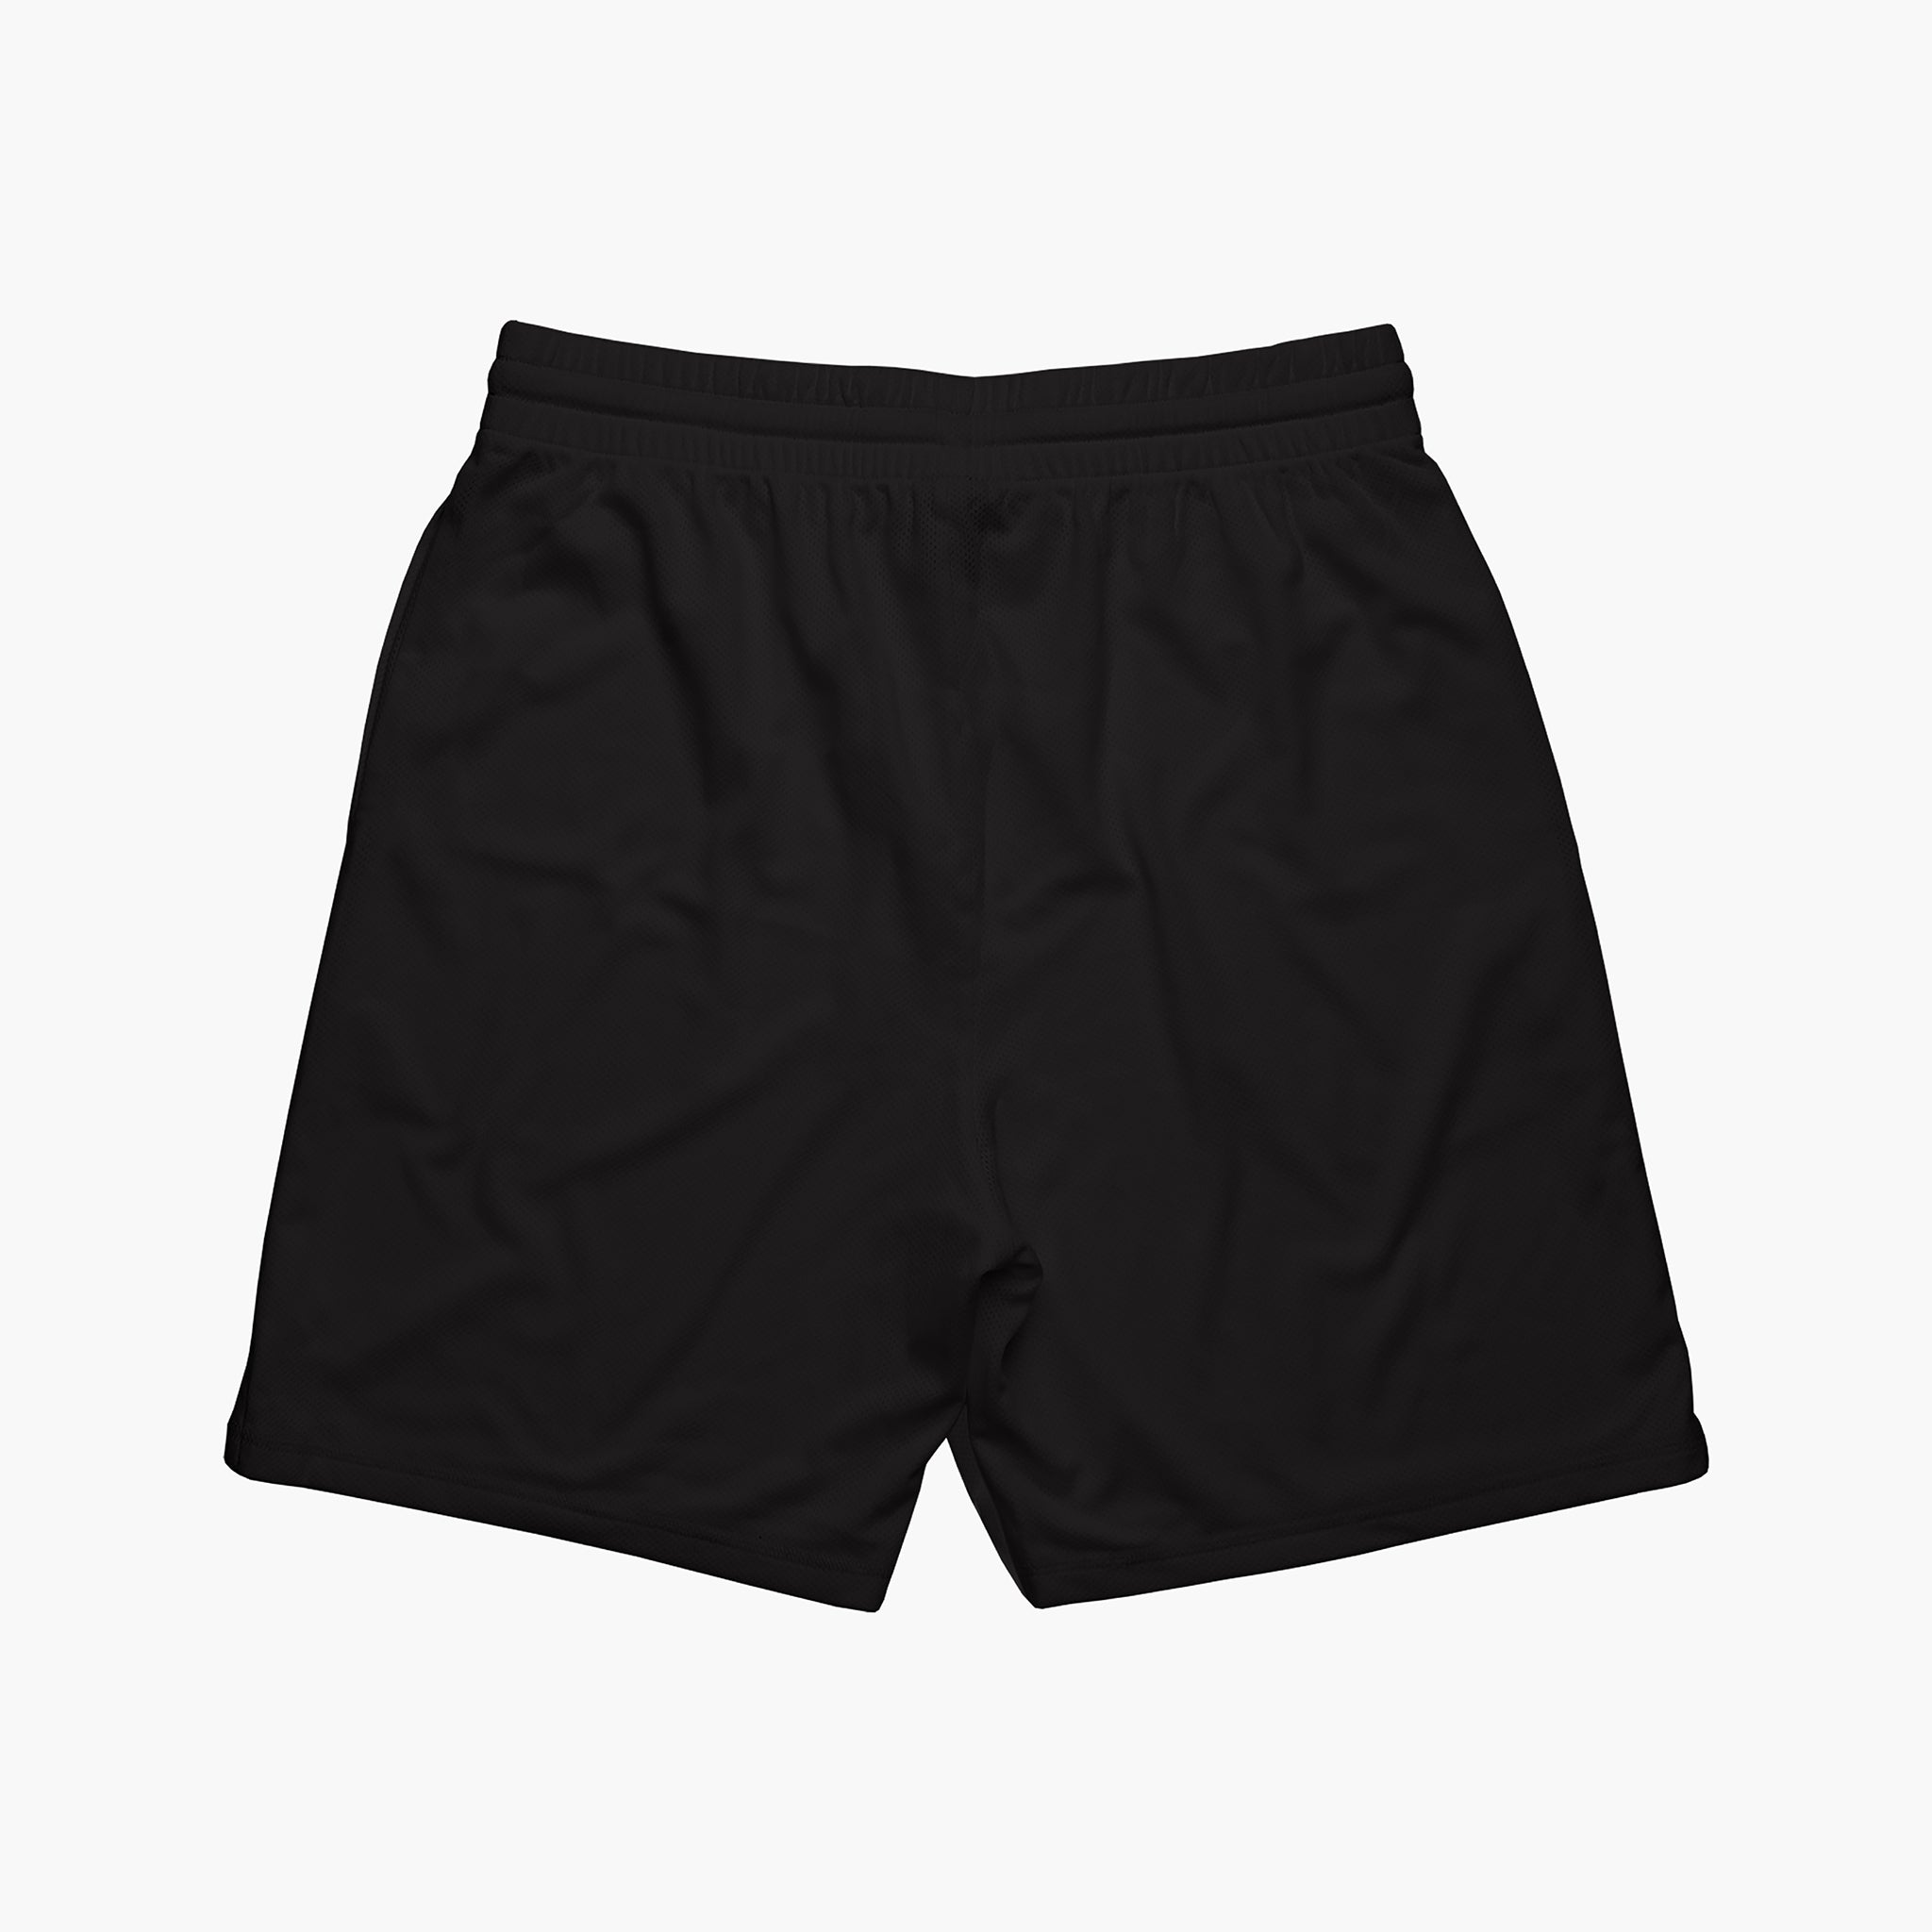 Green Wolf Stadium Shorts - Frequently Asked Questions